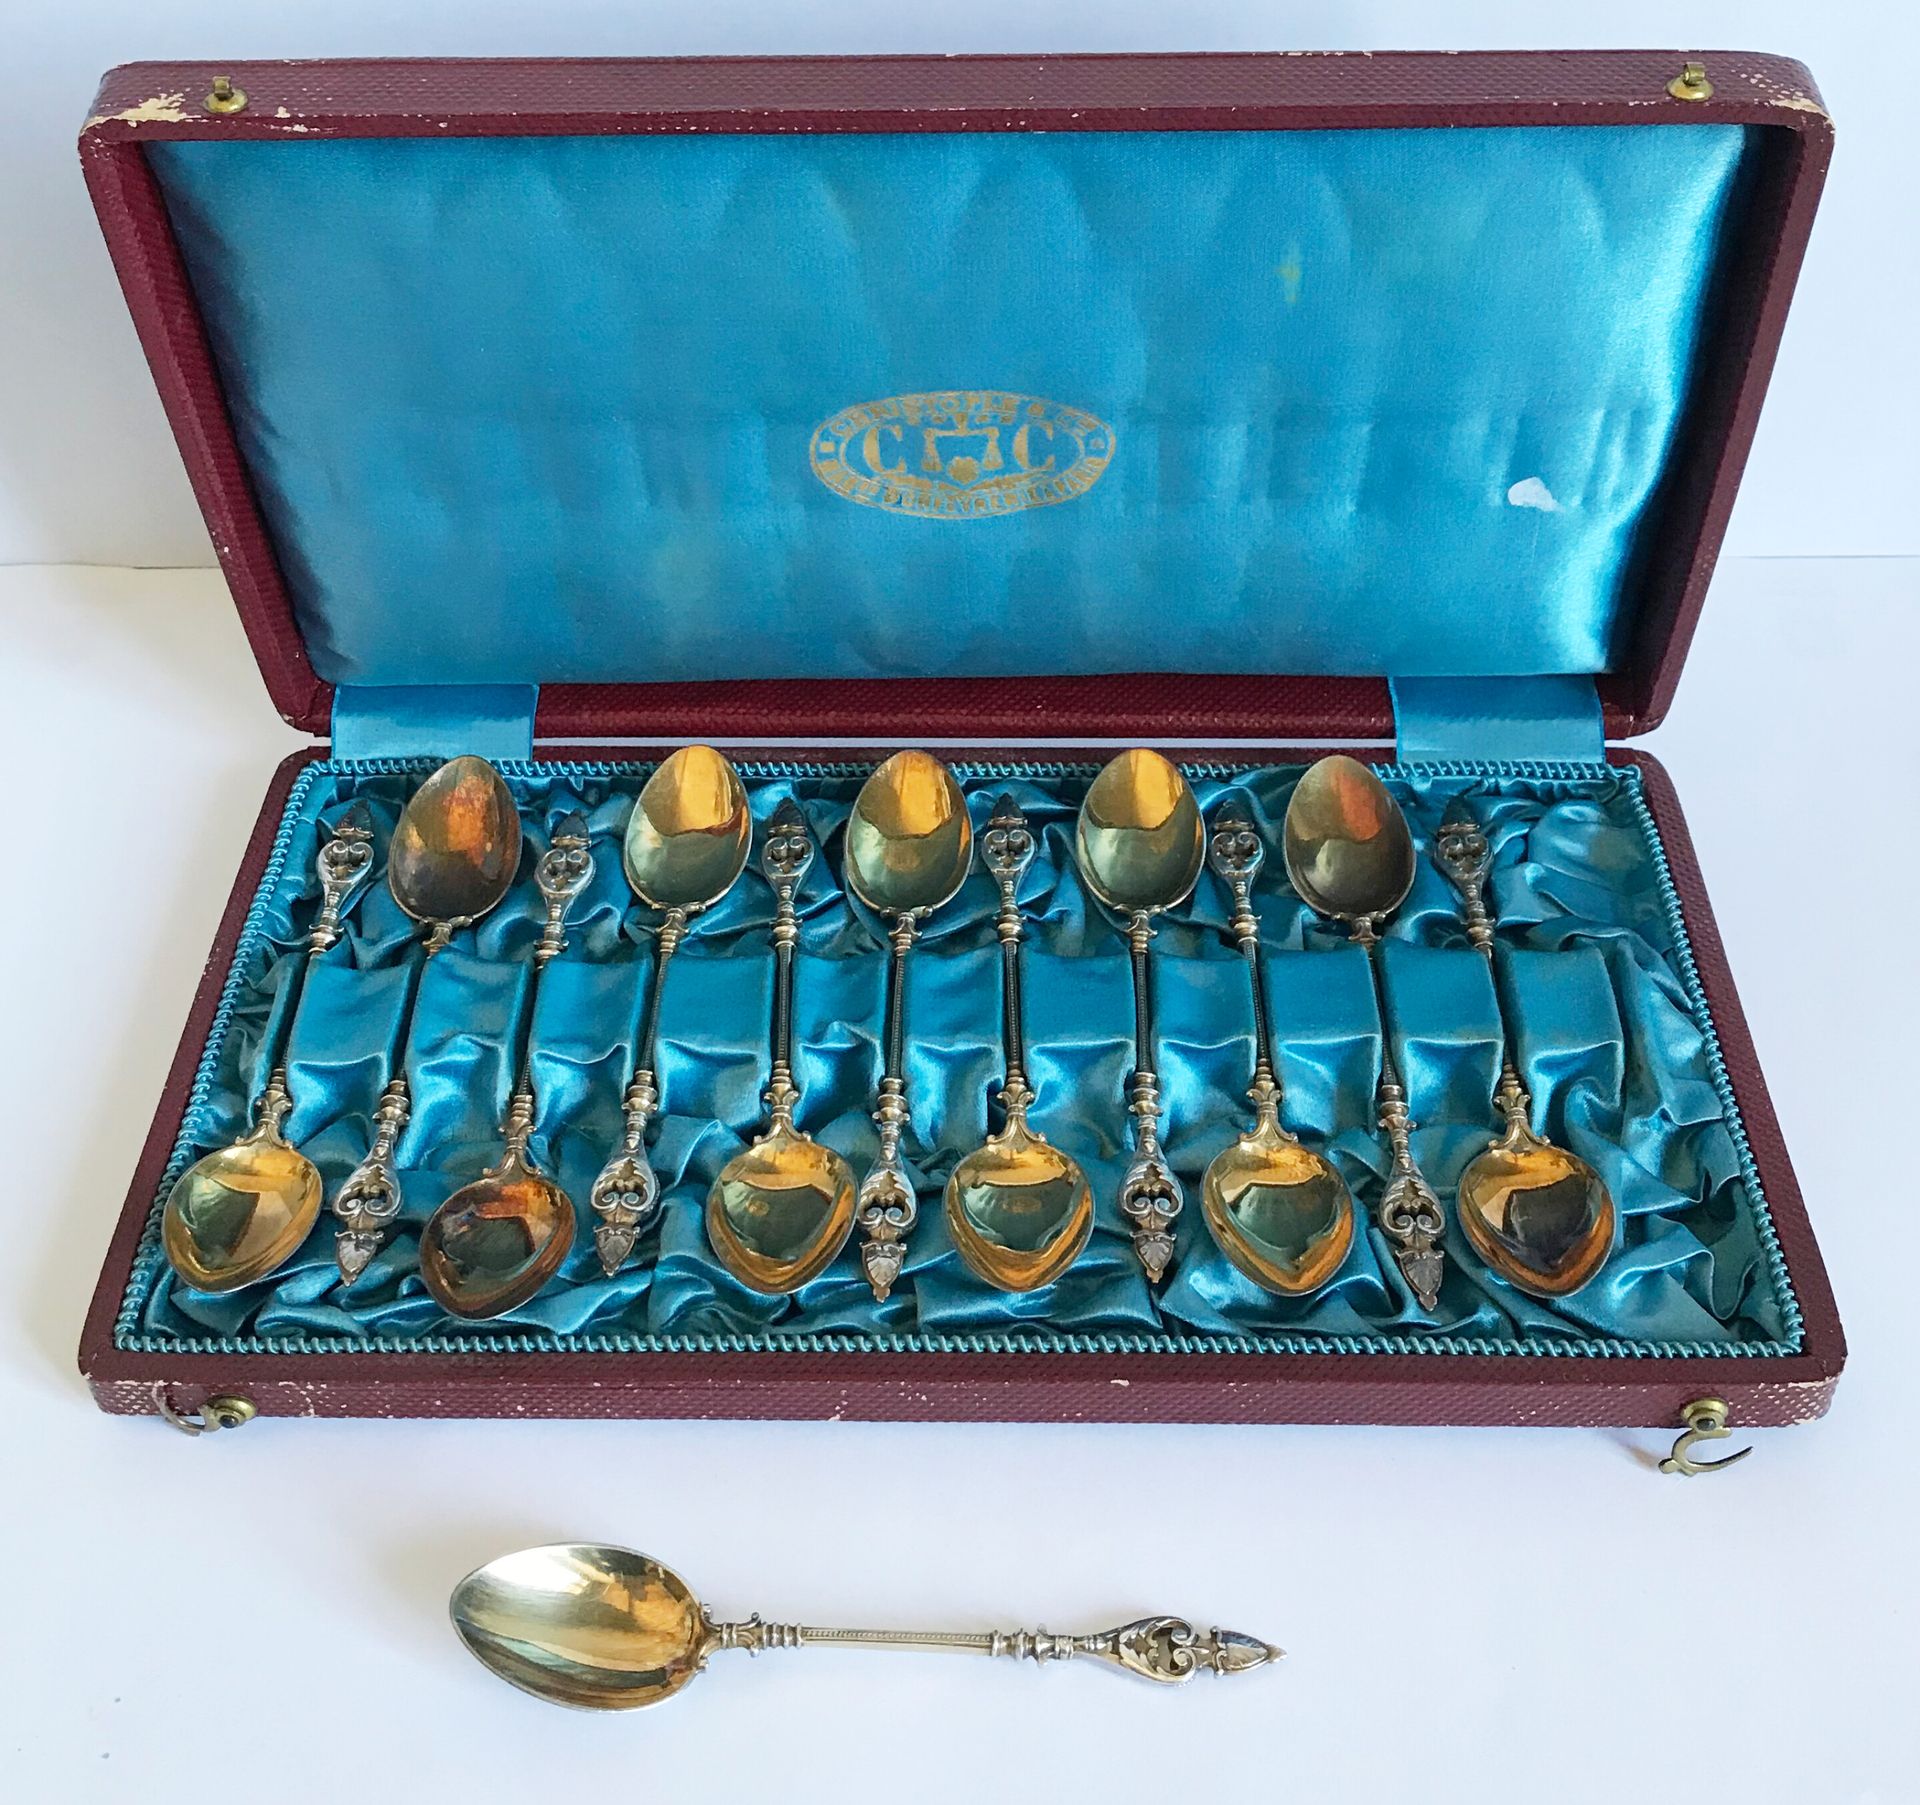 CHRISTOFLE CHRISTOFLE

Set of twelve coffee spoons in silver and gilt metal. The&hellip;